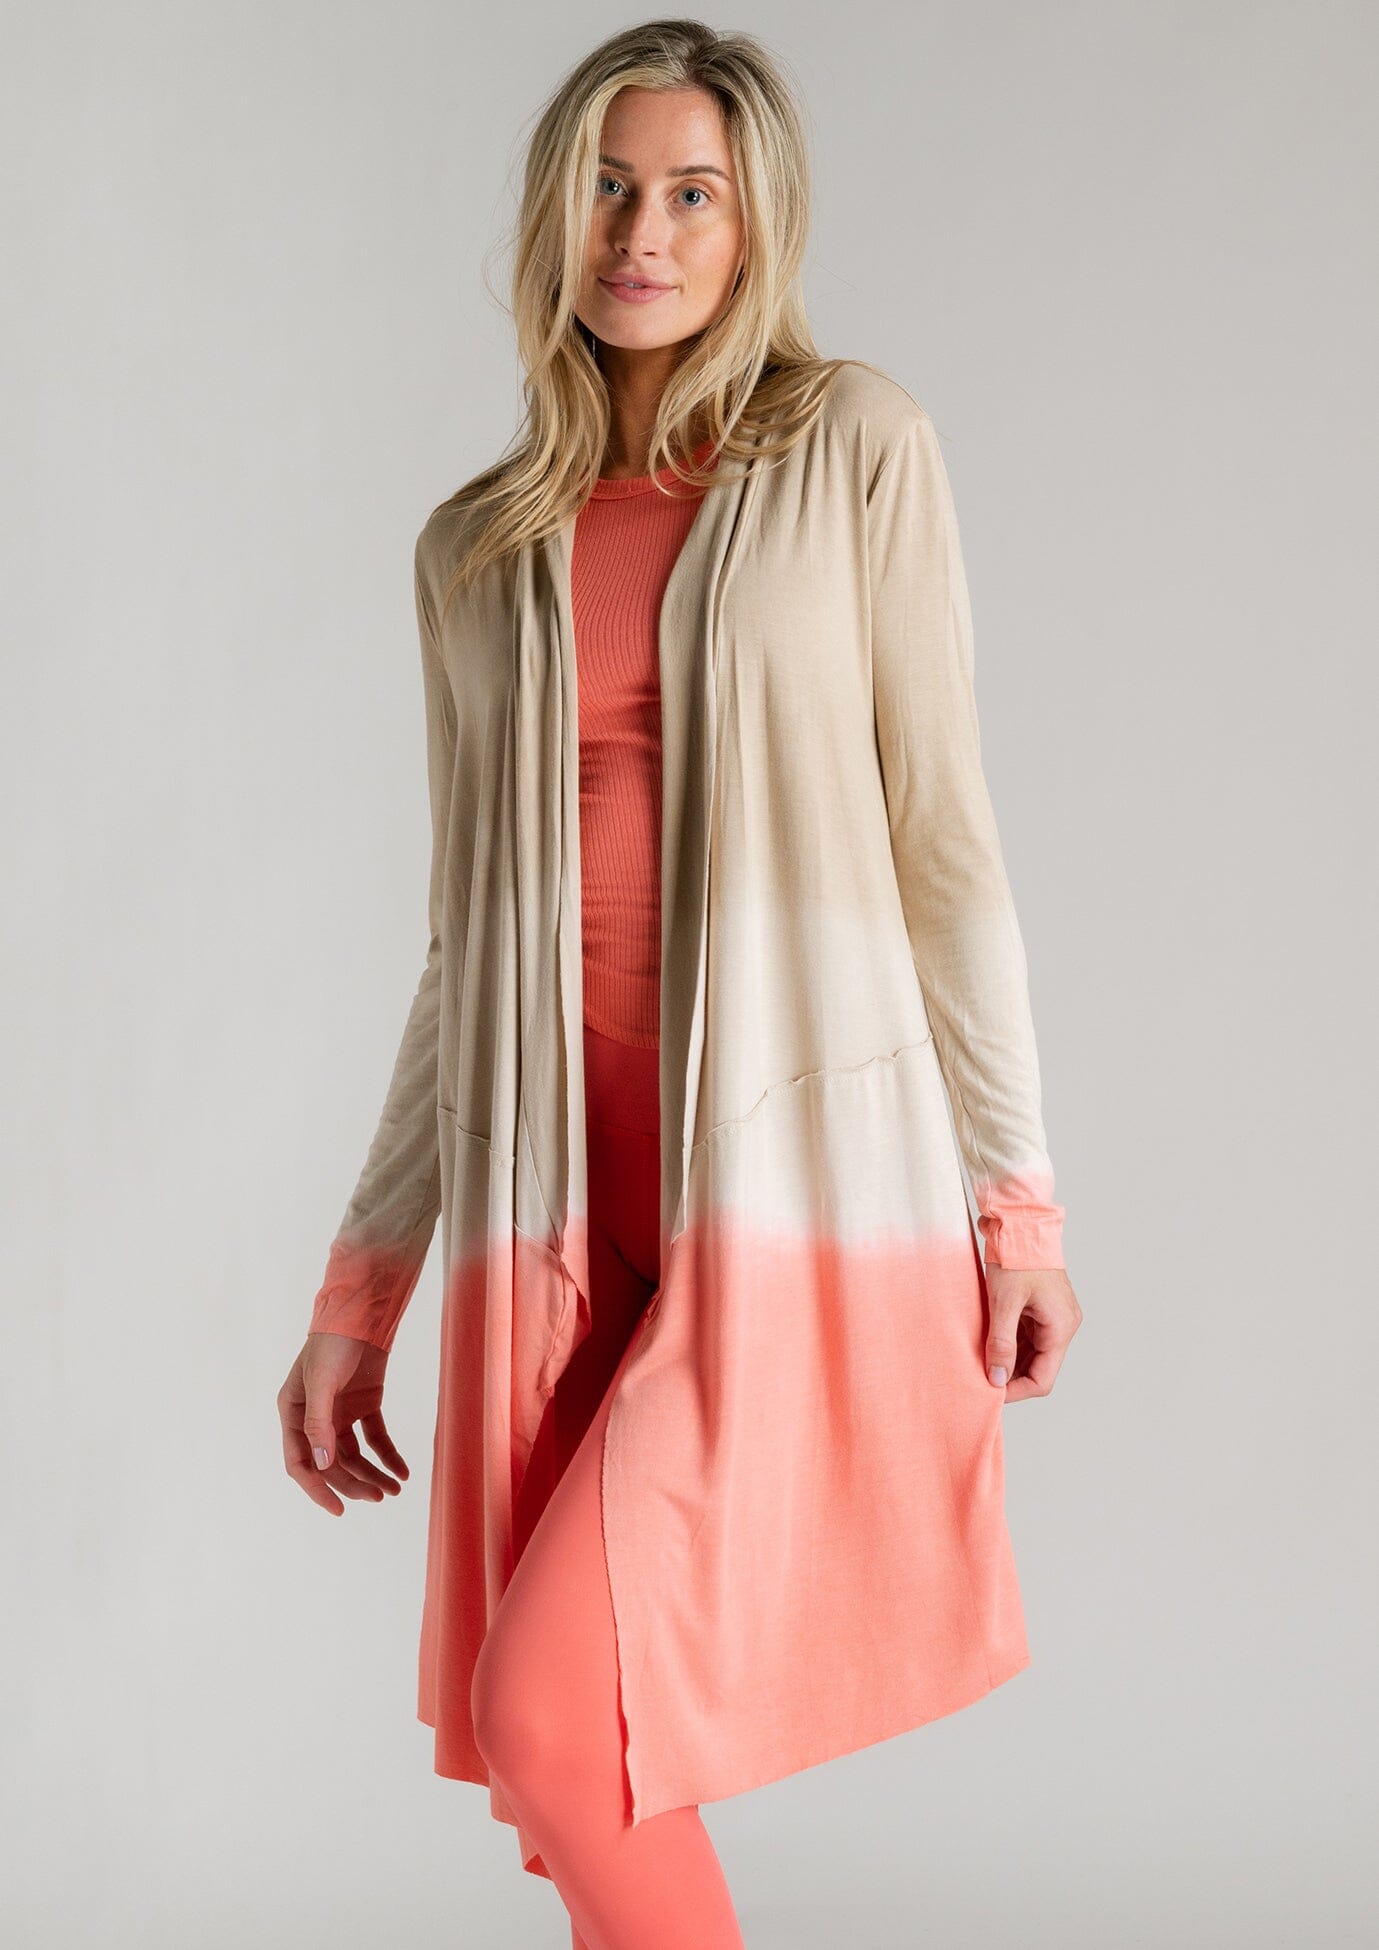 Devi Duster in OMC Ombre by Jala Spring 2023